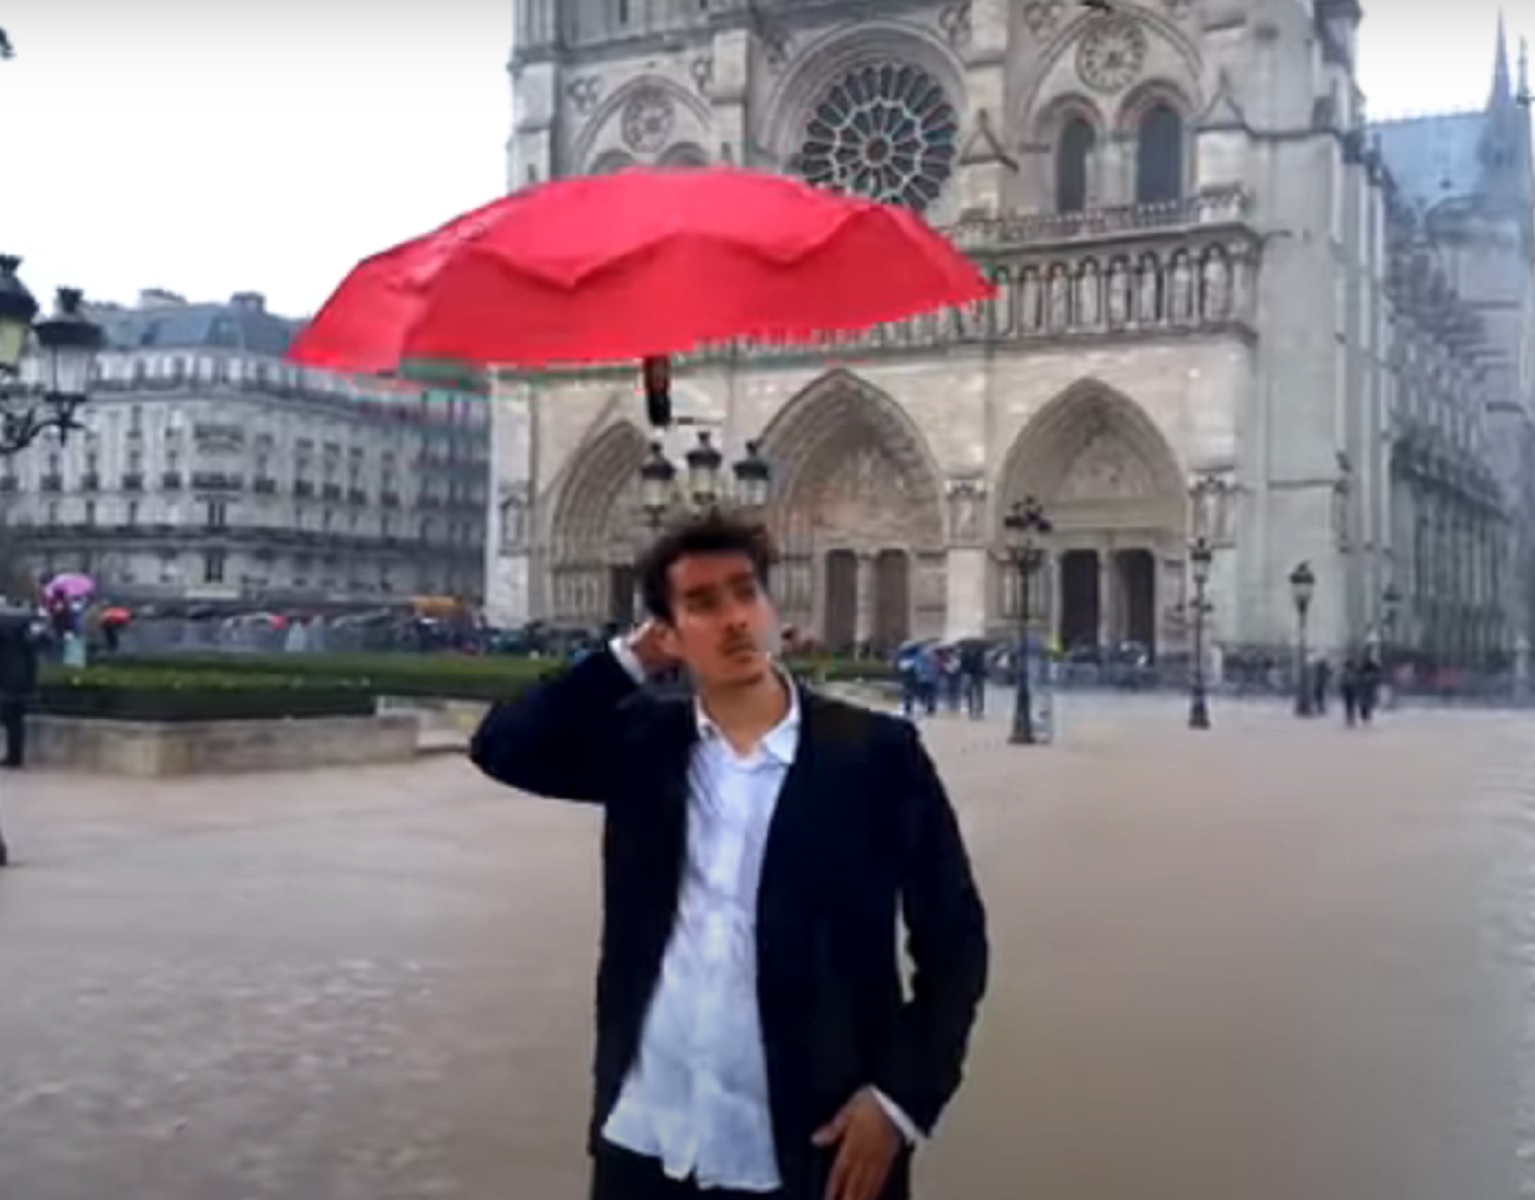 Powerful Features of Dronebrella (Hand-free umbrella or self-flying umbrella) and its Possible Price